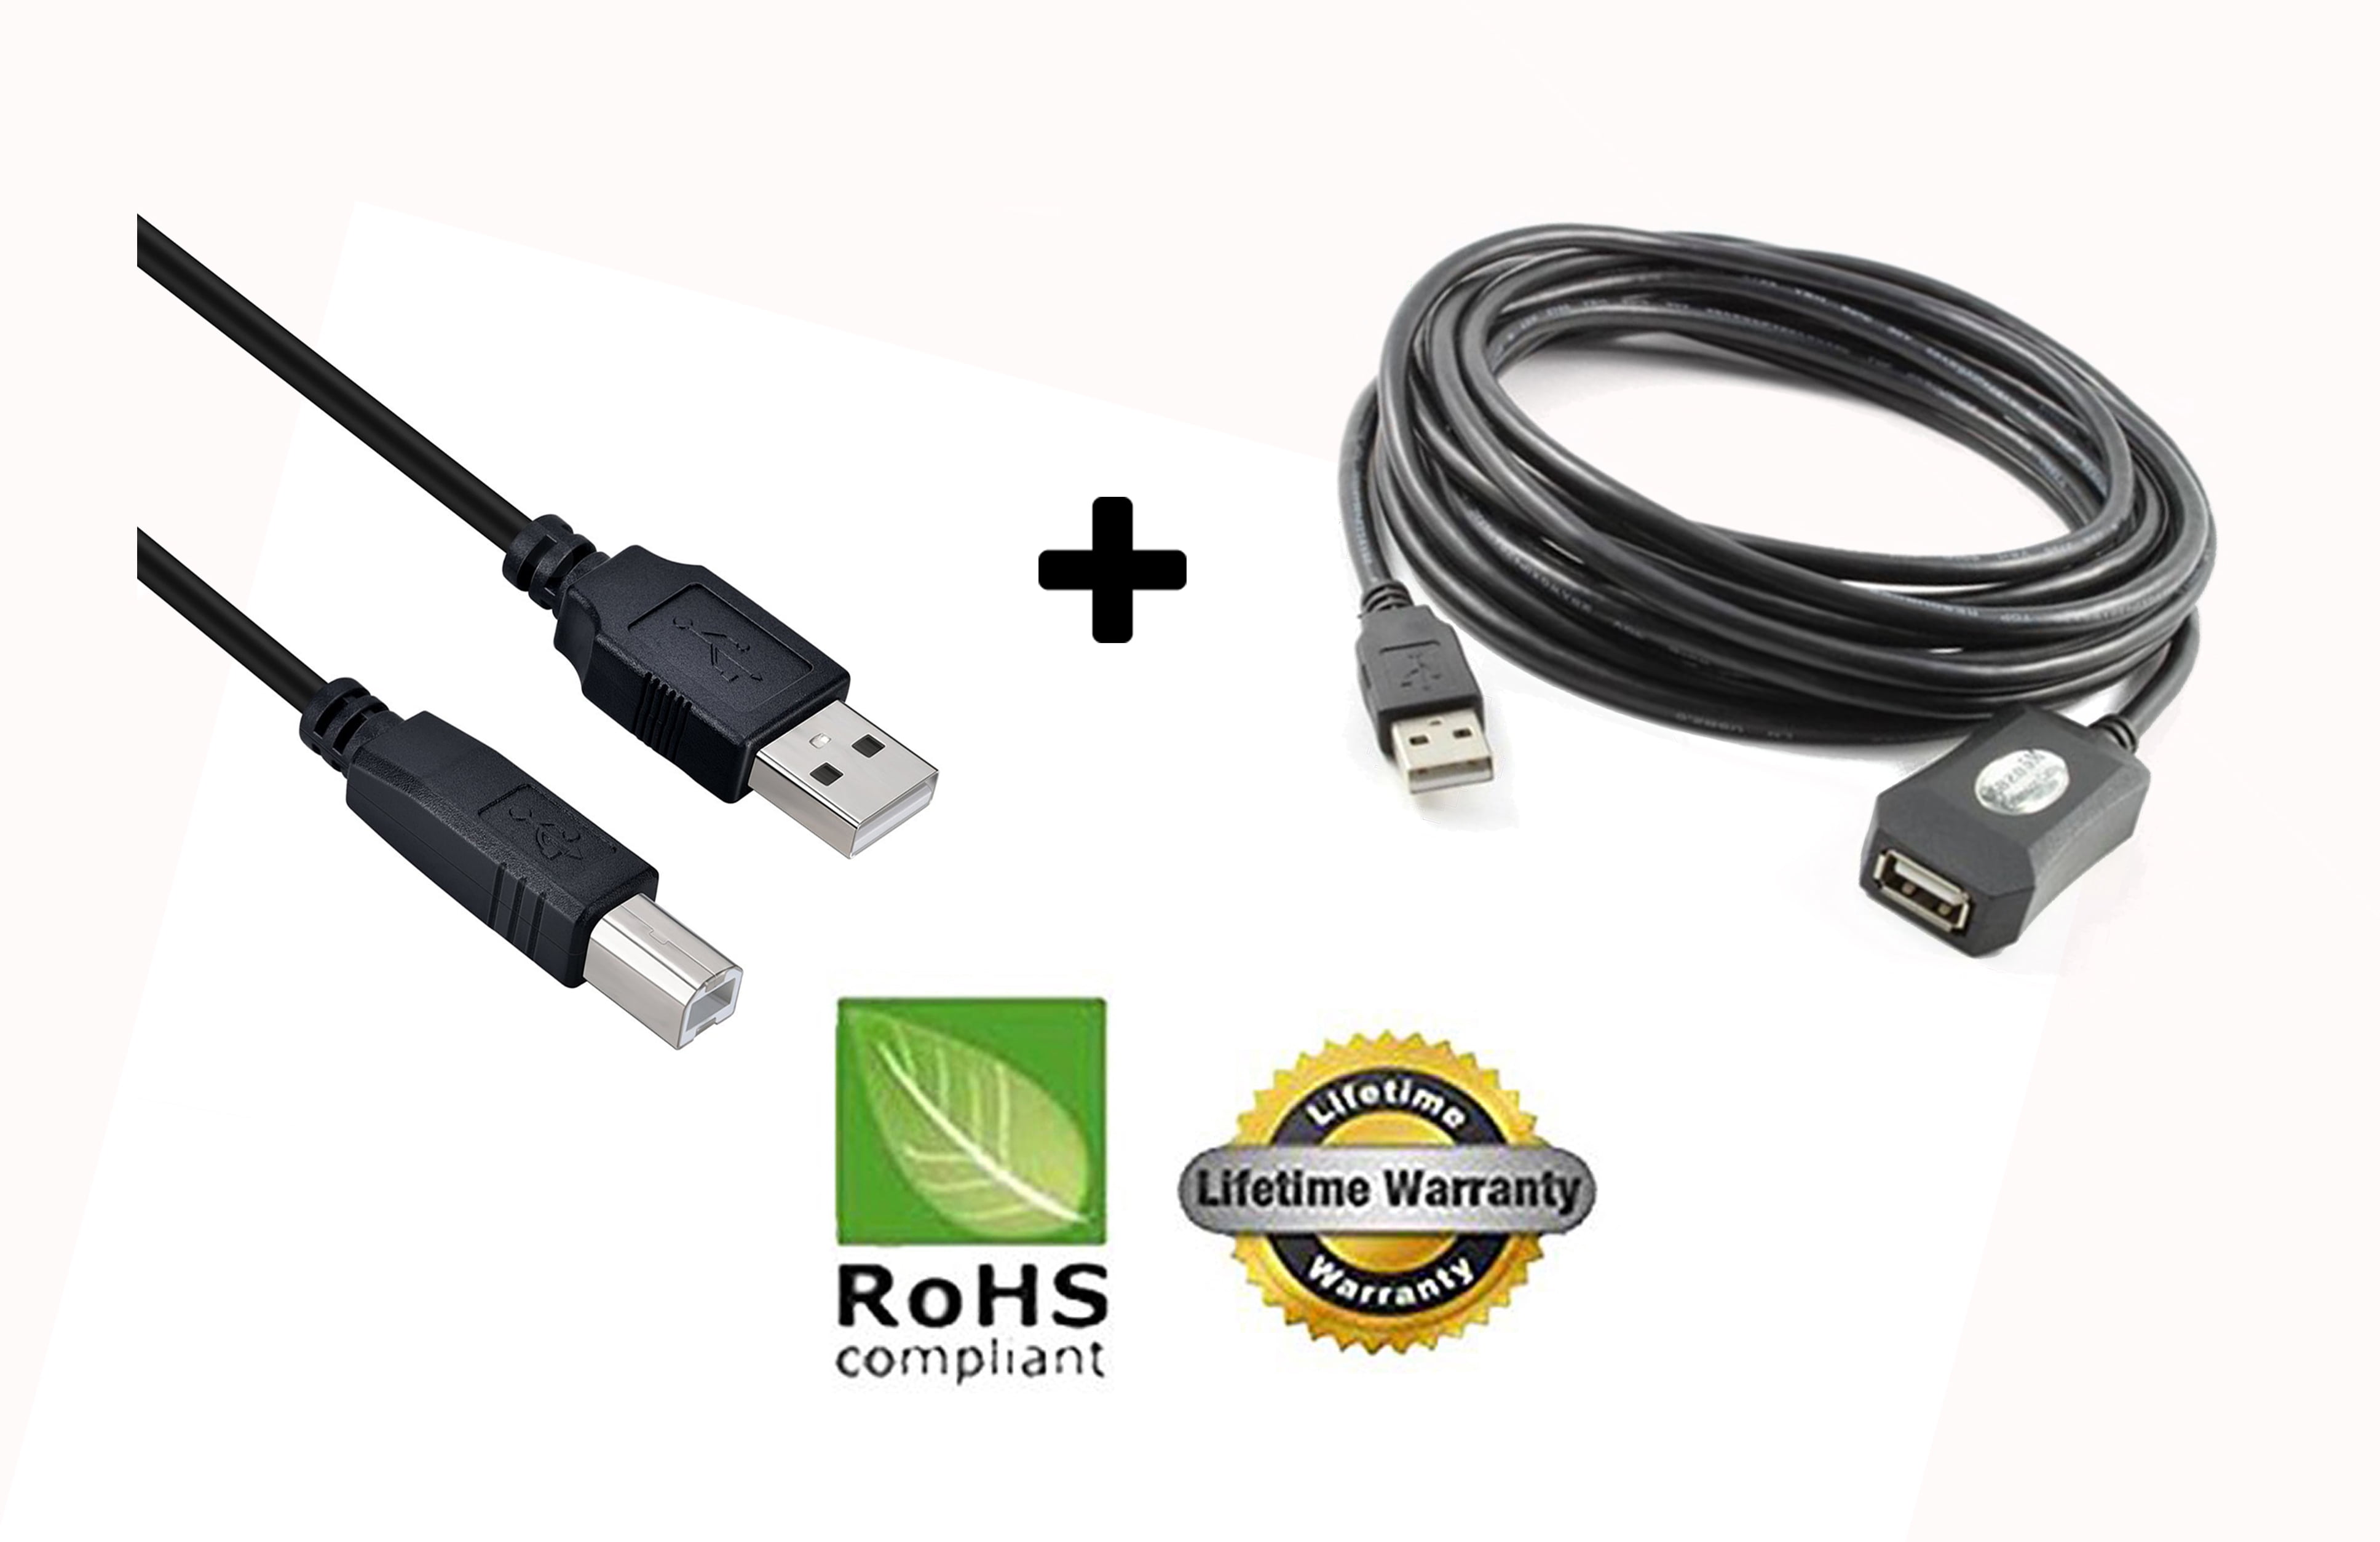 Ret ansøge mad USB 2.0 Cable - A-Male to B-Male for Senal XLR-to_USB Adapter (Specific  Models Only) - 10 FT/BLACK/15F Extension - Walmart.com